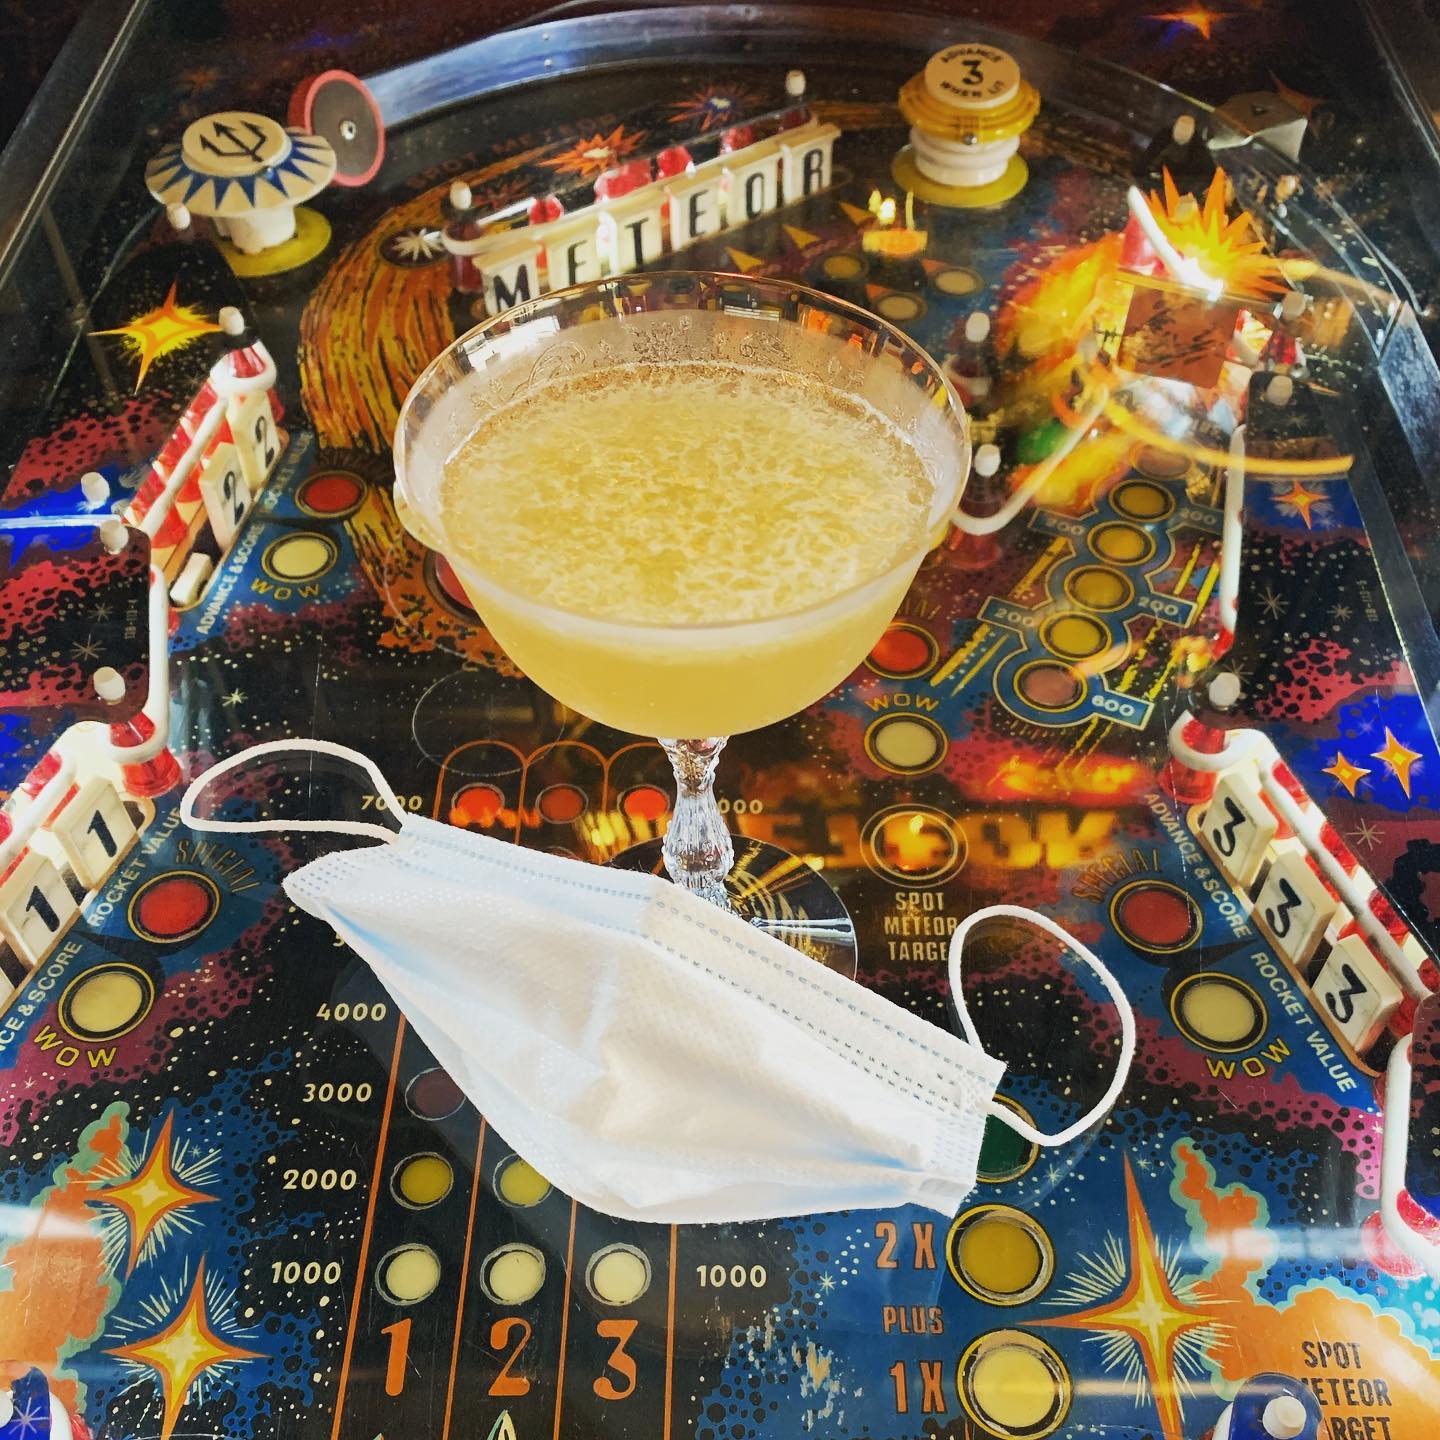 A martini glass with an icy yellow liquid sits on a vintage pinball machine with a blue, medical face mask in front of it